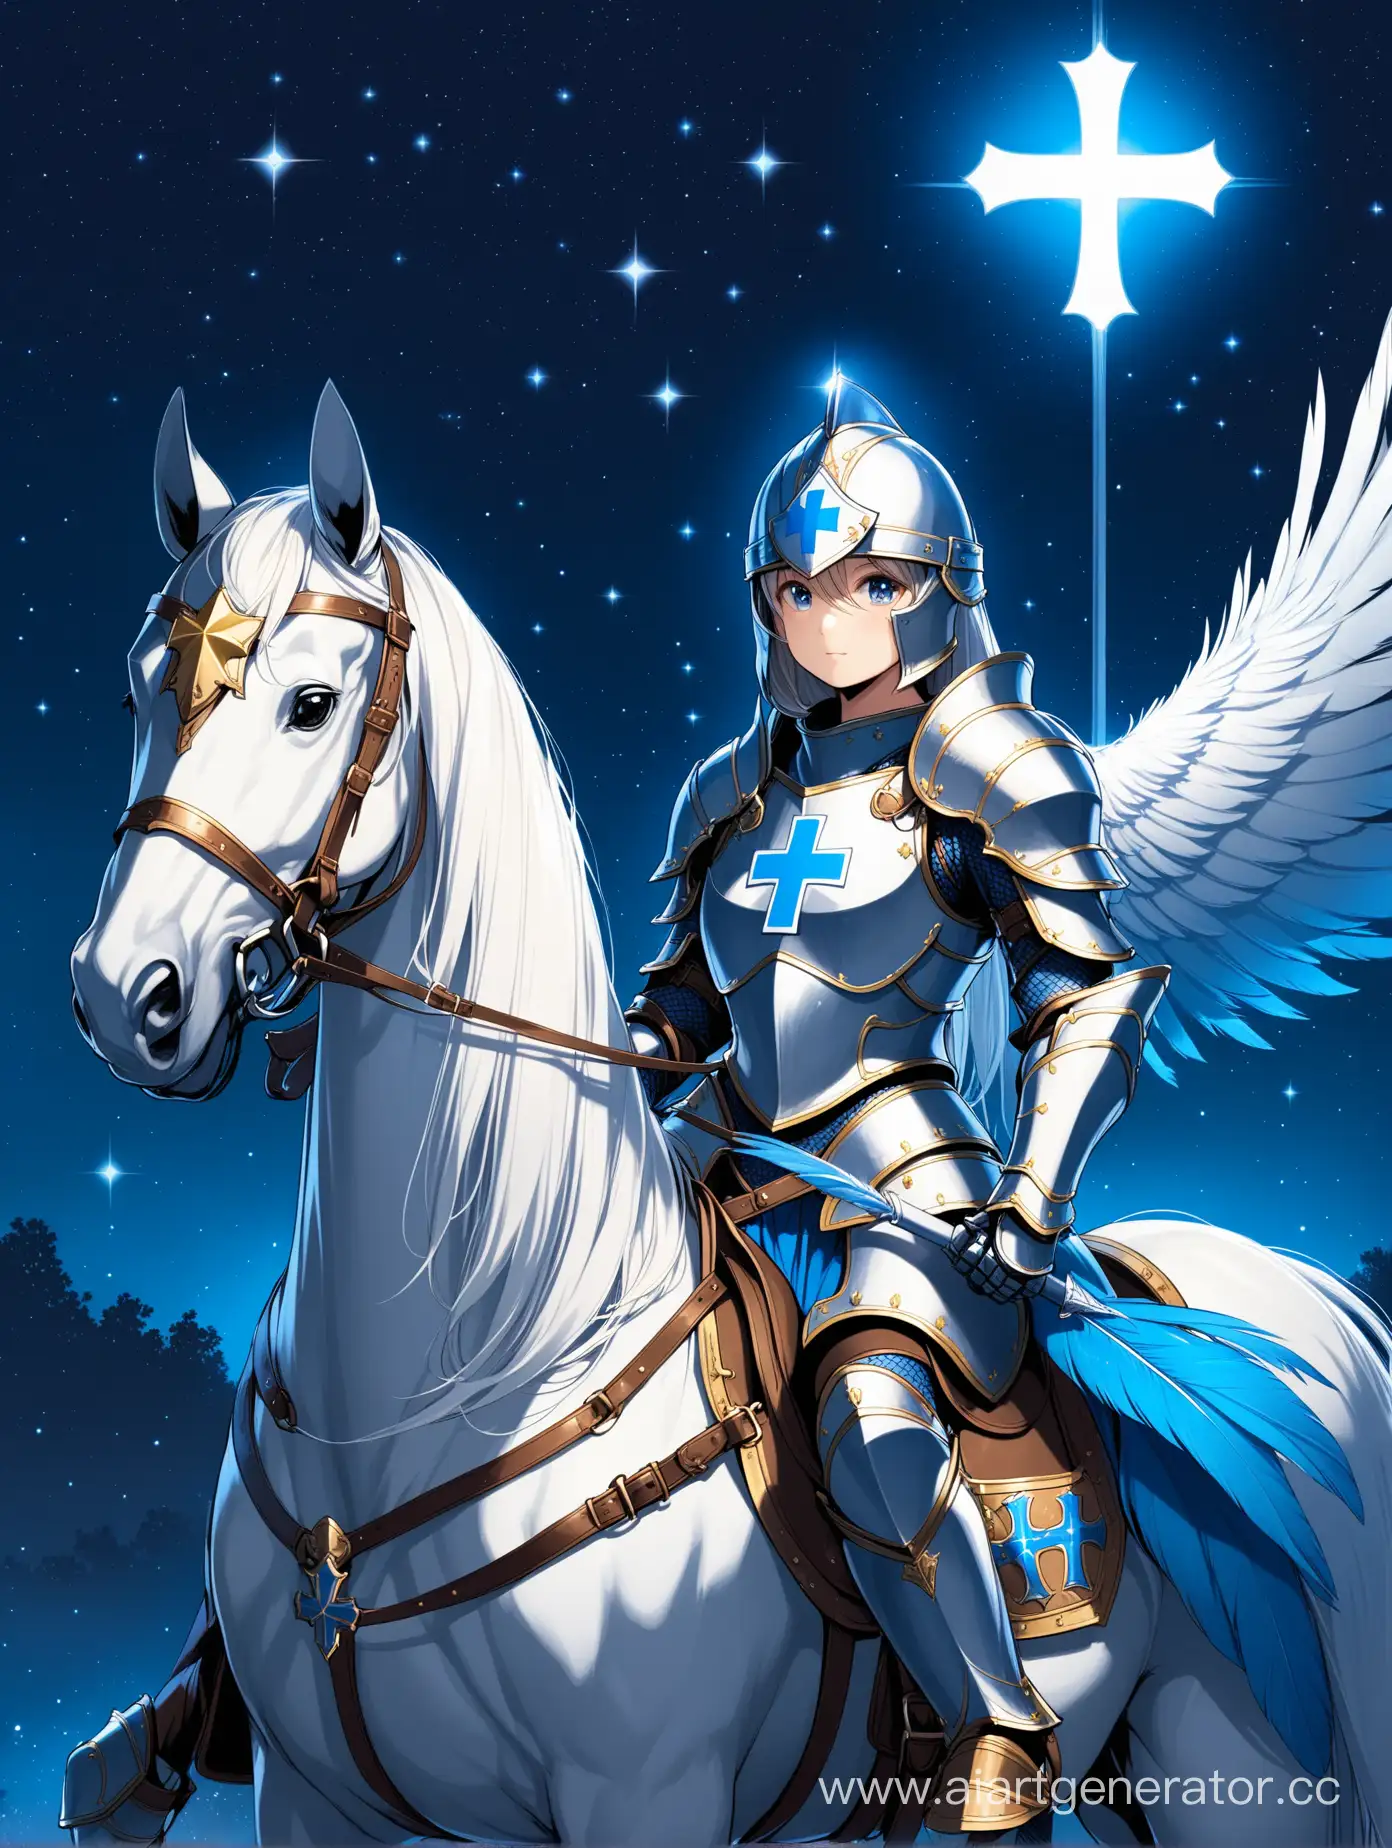 Solo-Knight-Riding-Horseback-at-Night-in-Silver-Armor-with-Blue-Feathers-and-Gold-Accents